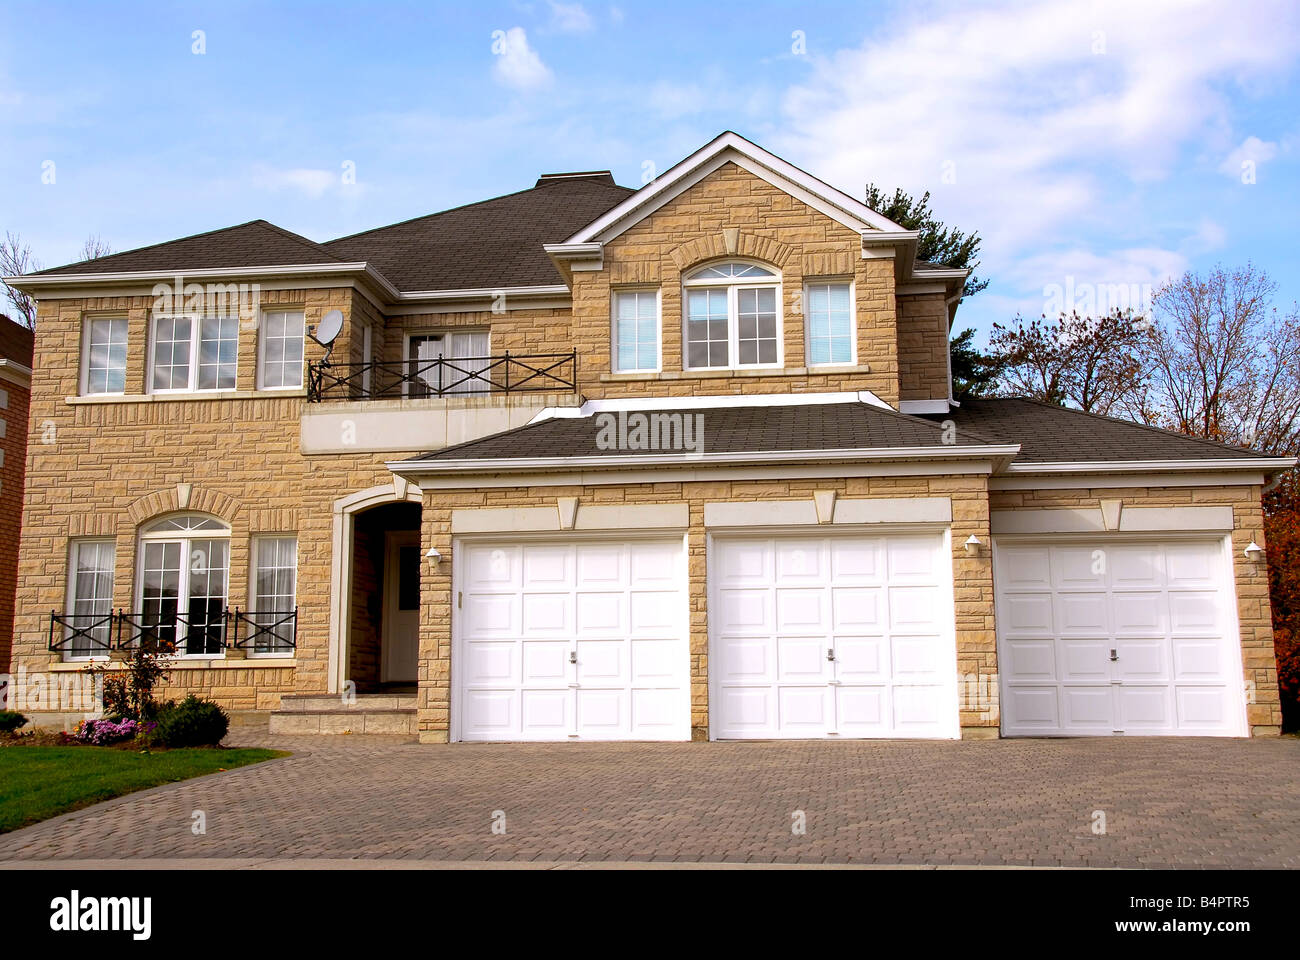 New detached single family luxury home with stone facade and tripple garage Stock Photo